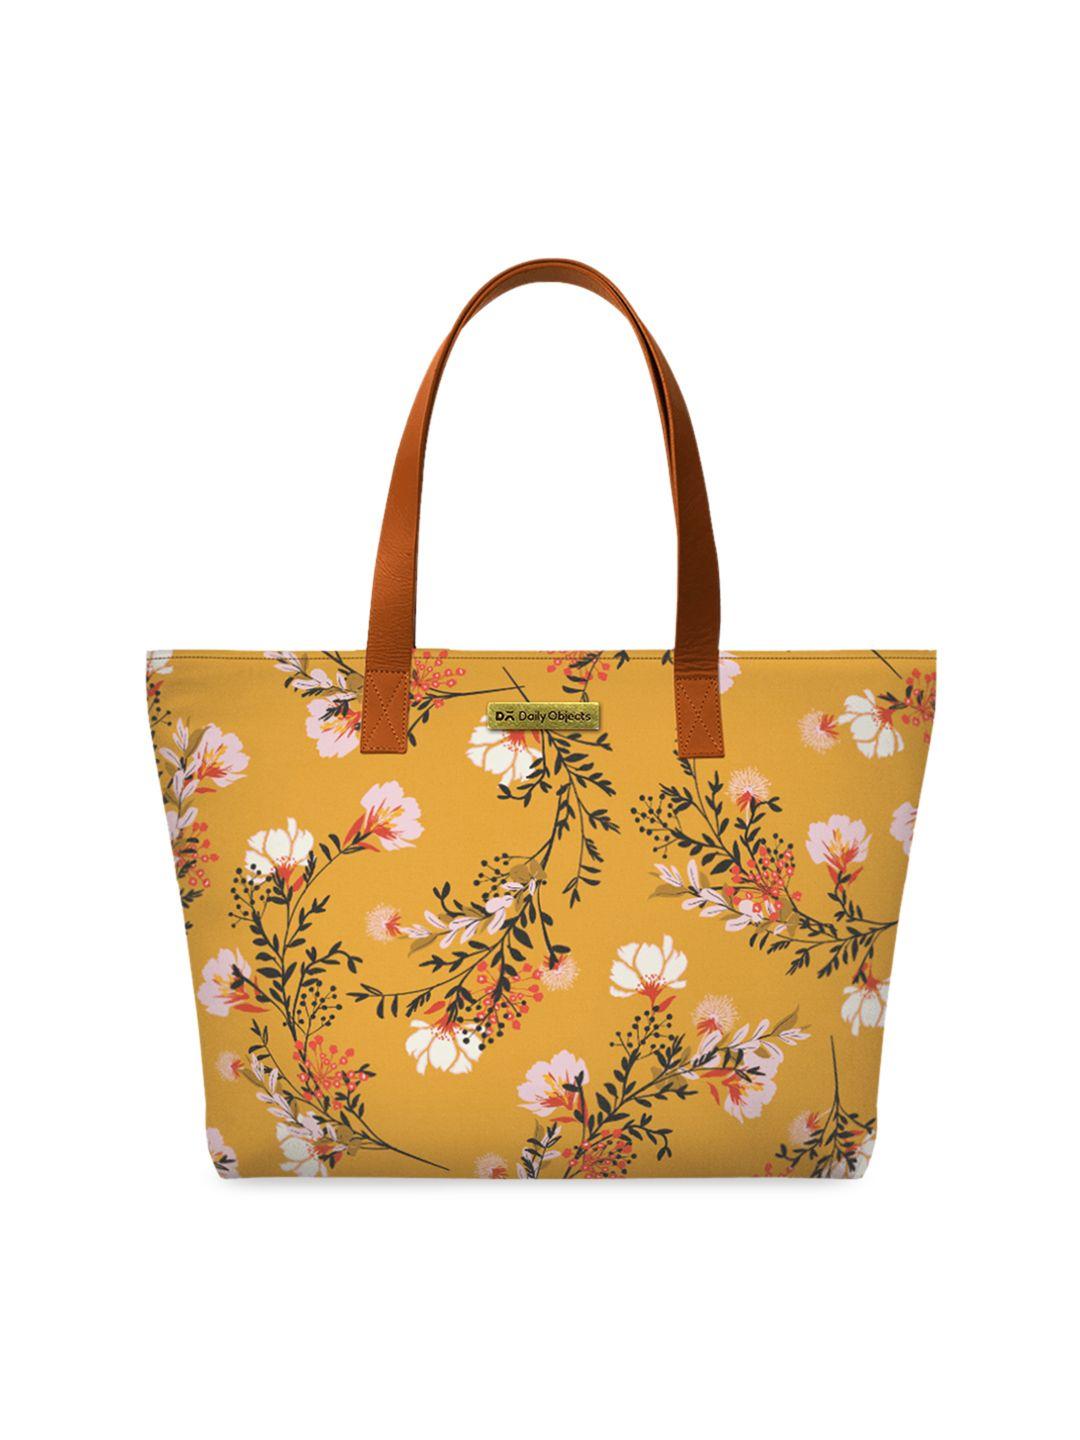 dailyobjects mustard yellow & white floral print tote bag